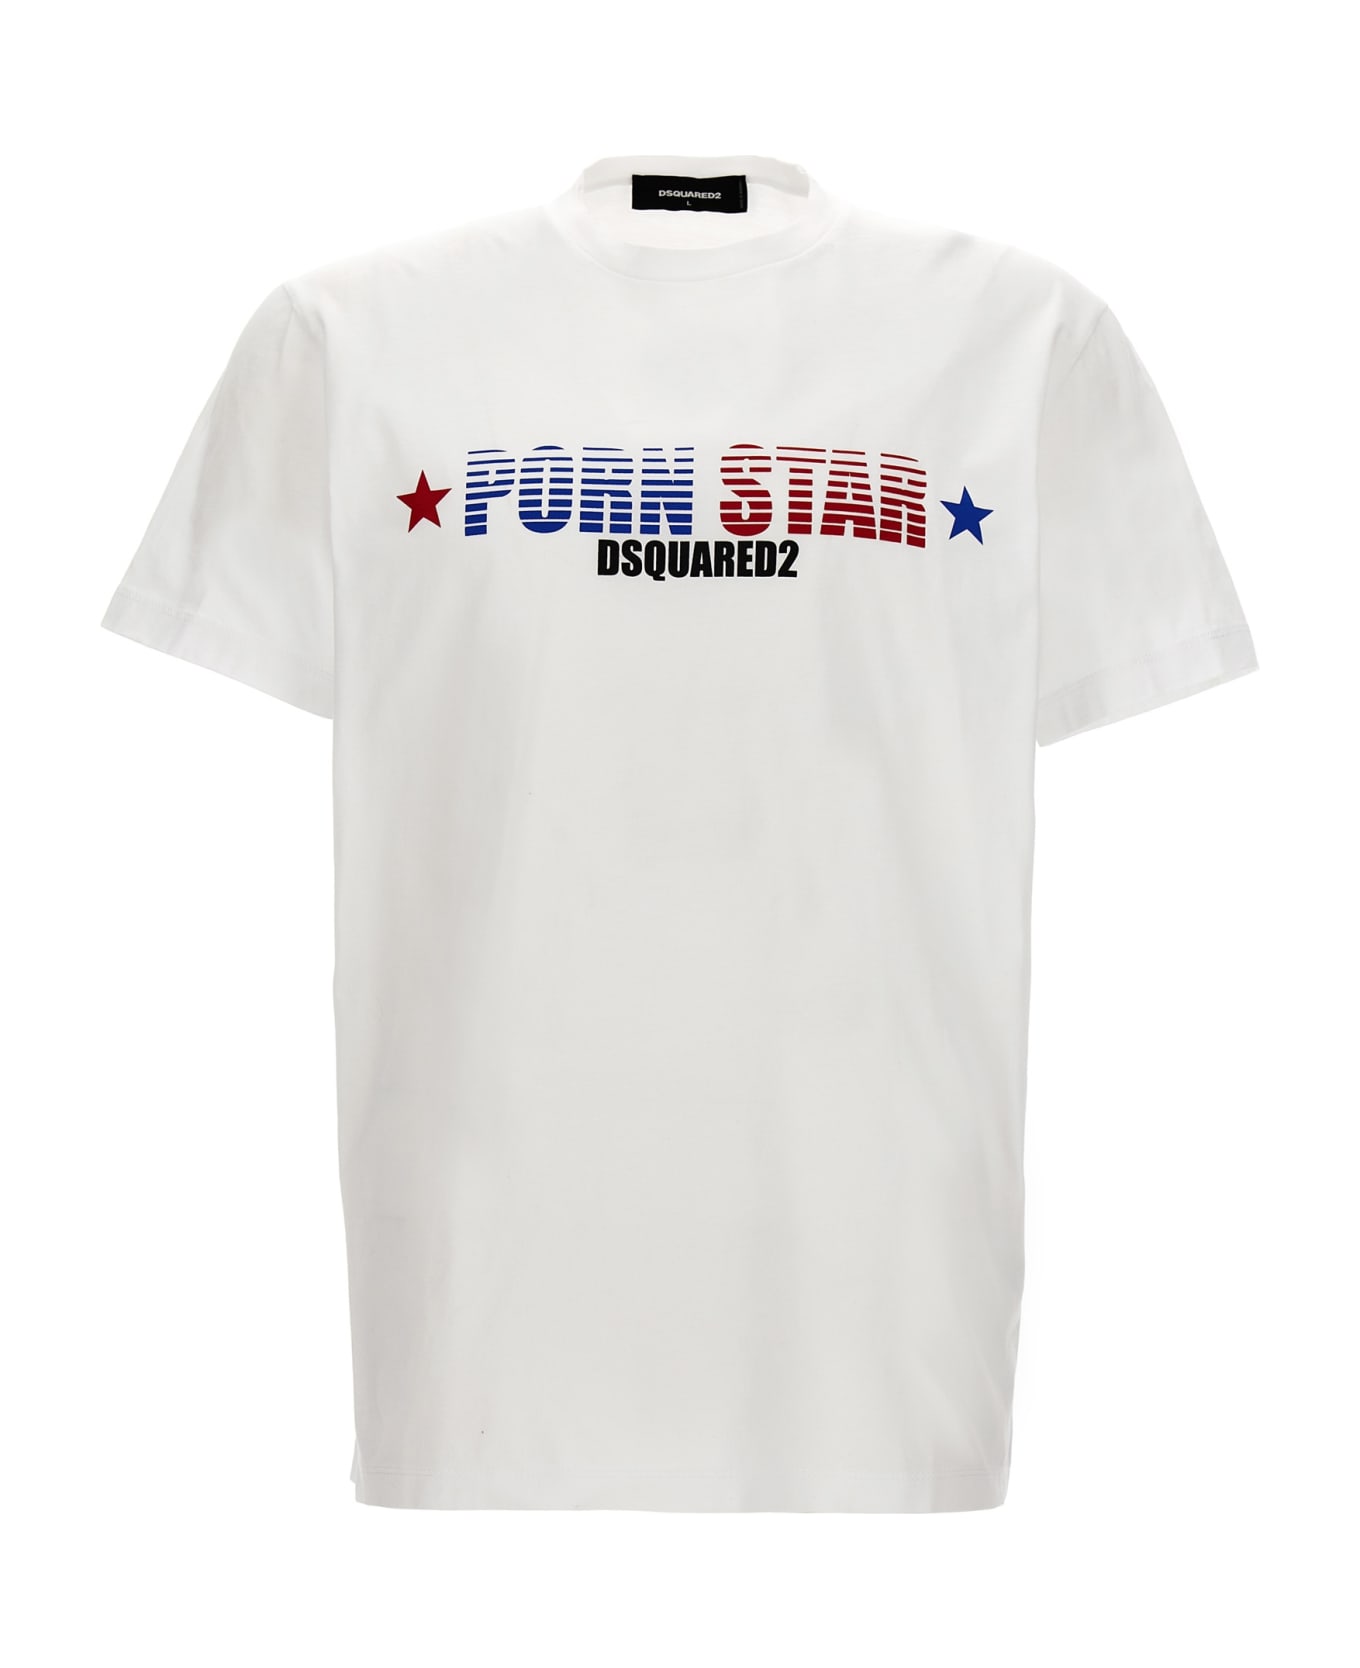 Dsquared2 Rocco Cool Print T-shirt - WHITE